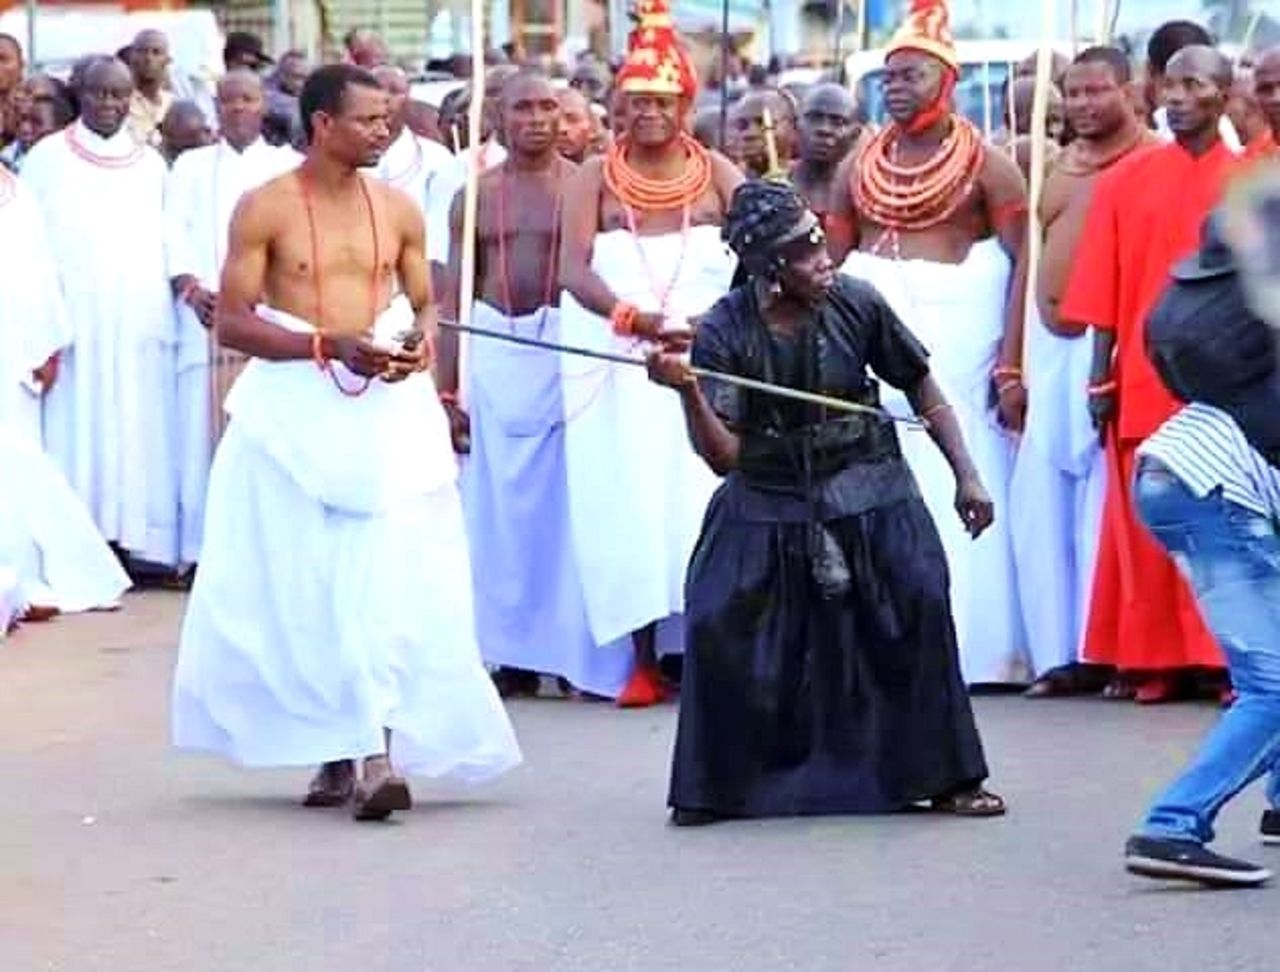 One of the warriors clad in black during the procession.